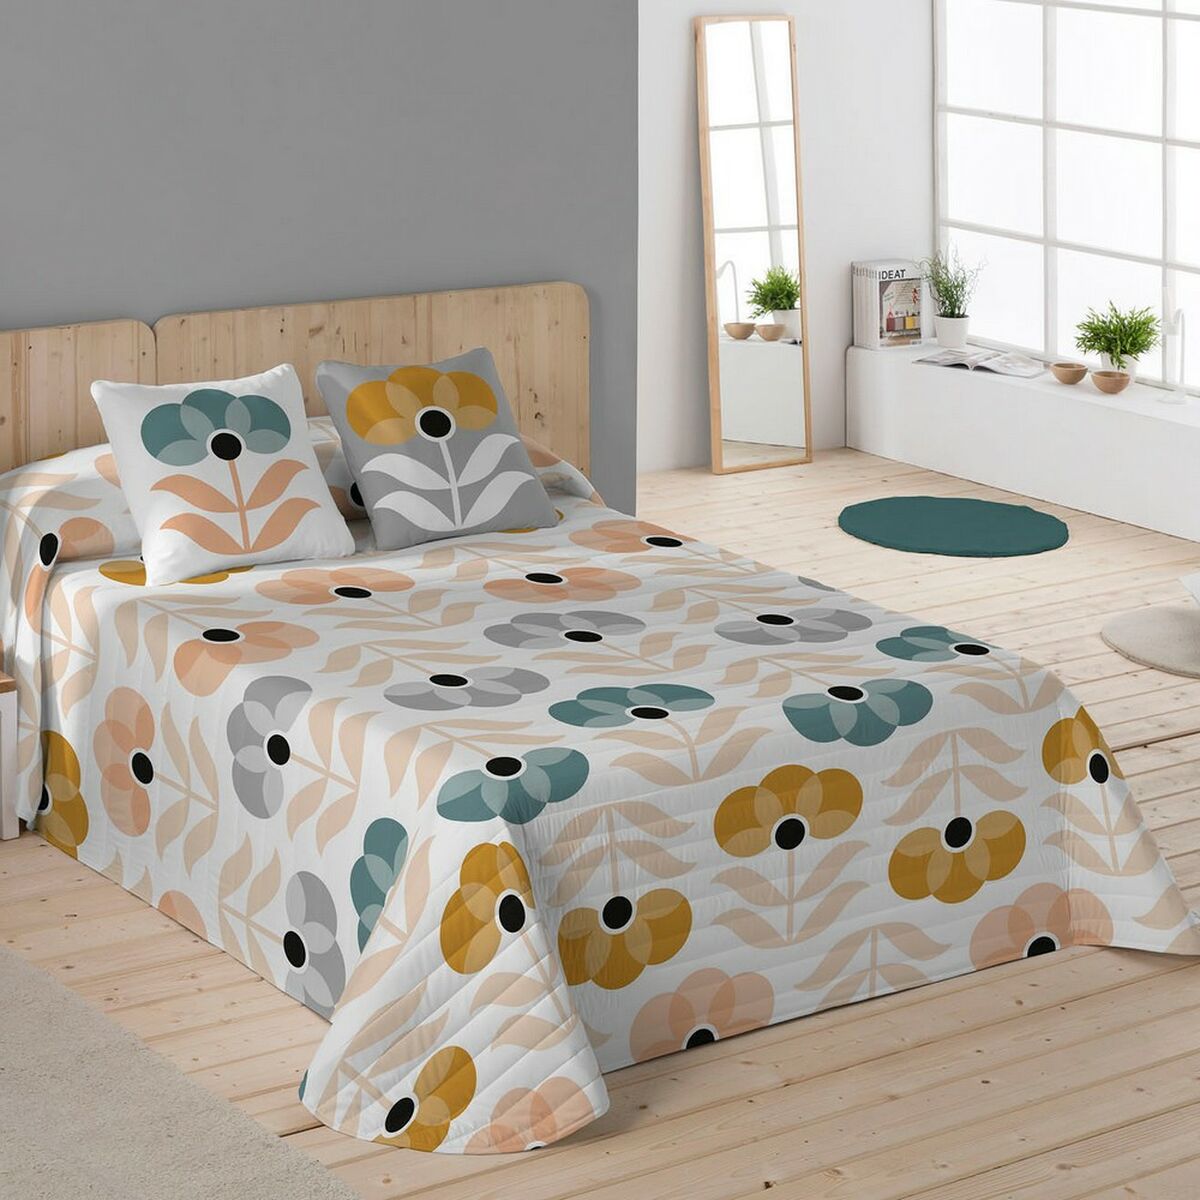 Bedspread (quilt) Icehome Lars 250 x 260 cm